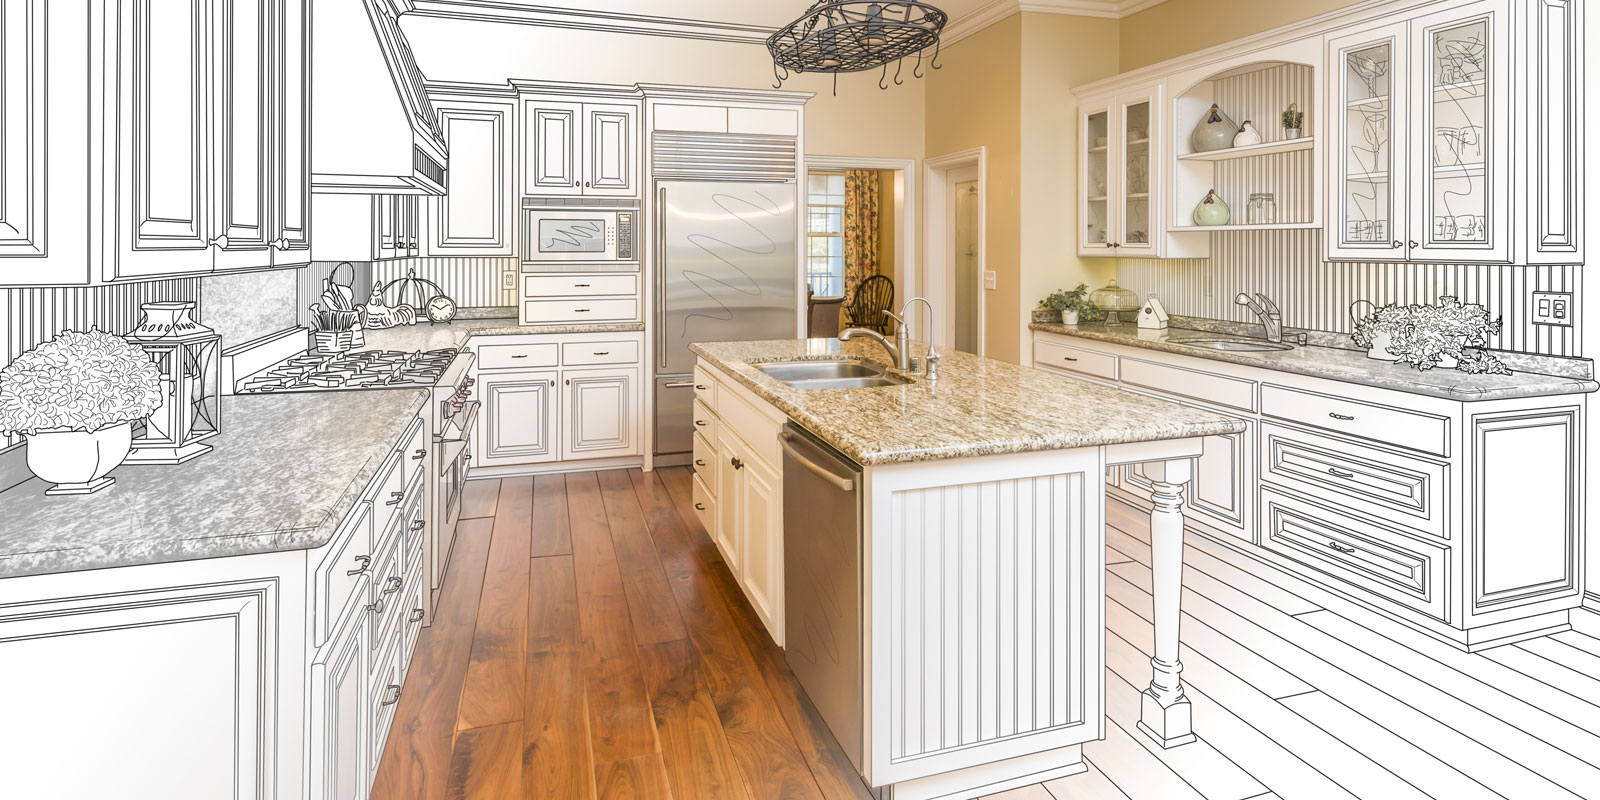 Image of a kitchen concept from design to reality